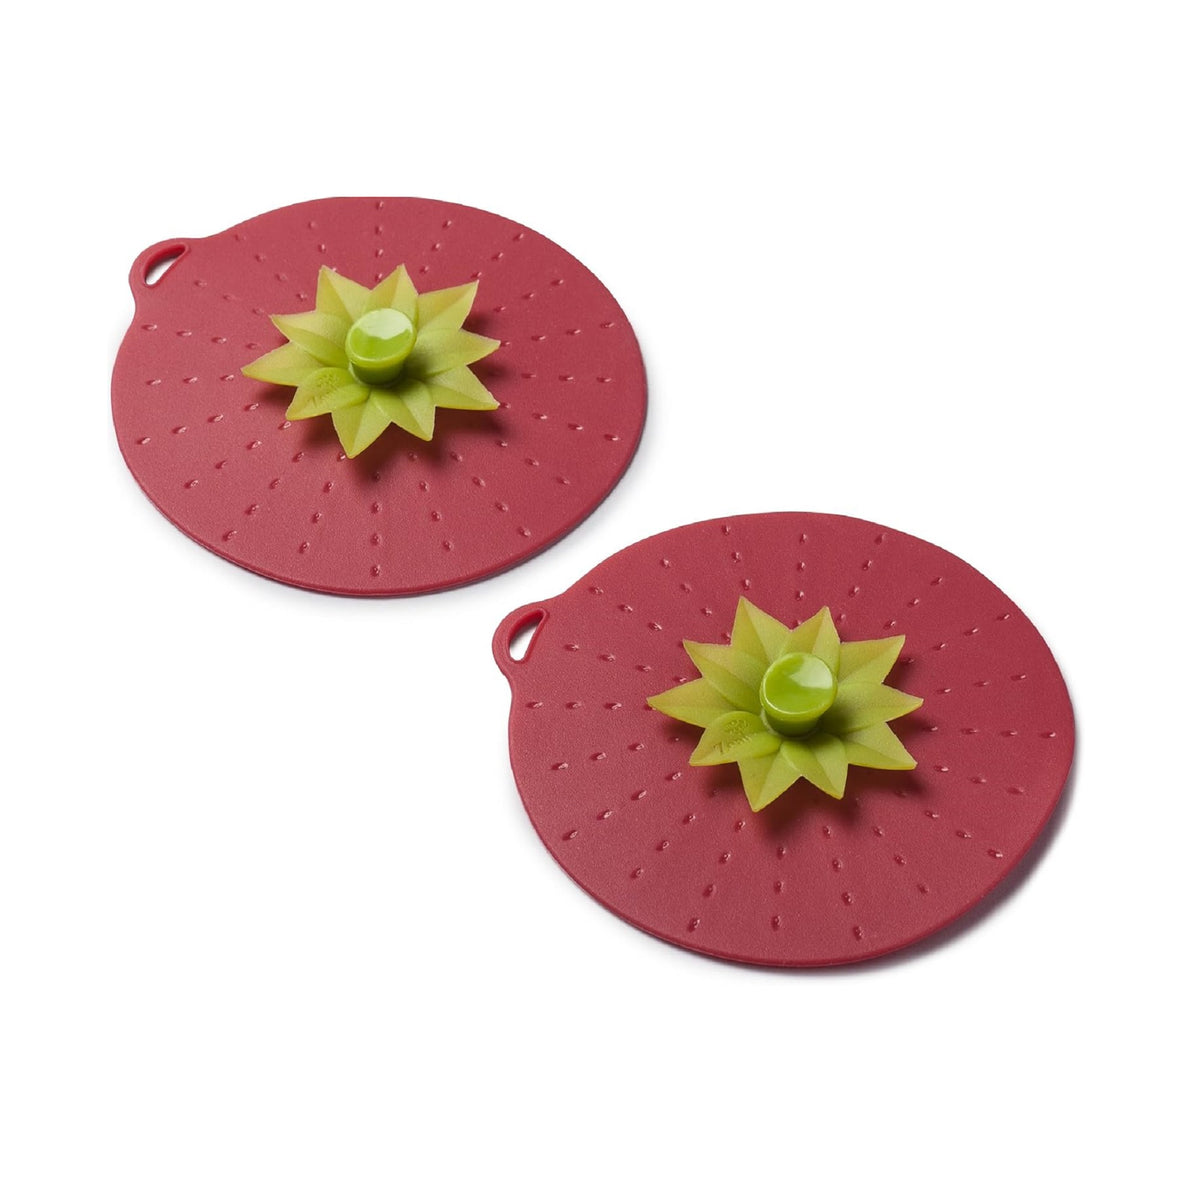 Strawberry Self Sealing Silicone Lid, Set of 2, Red